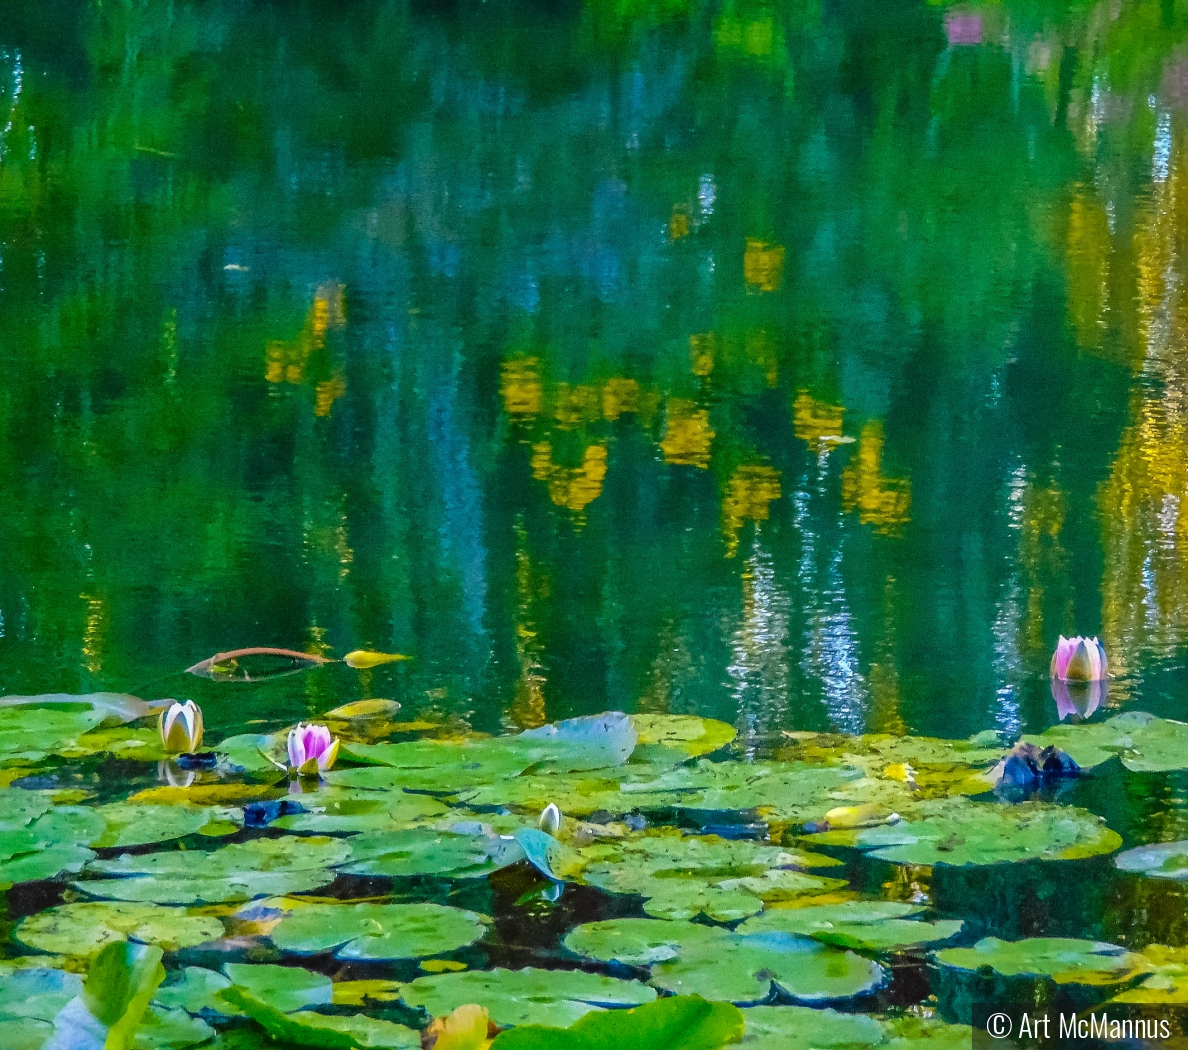 Impressionism by Nature by Art McMannus